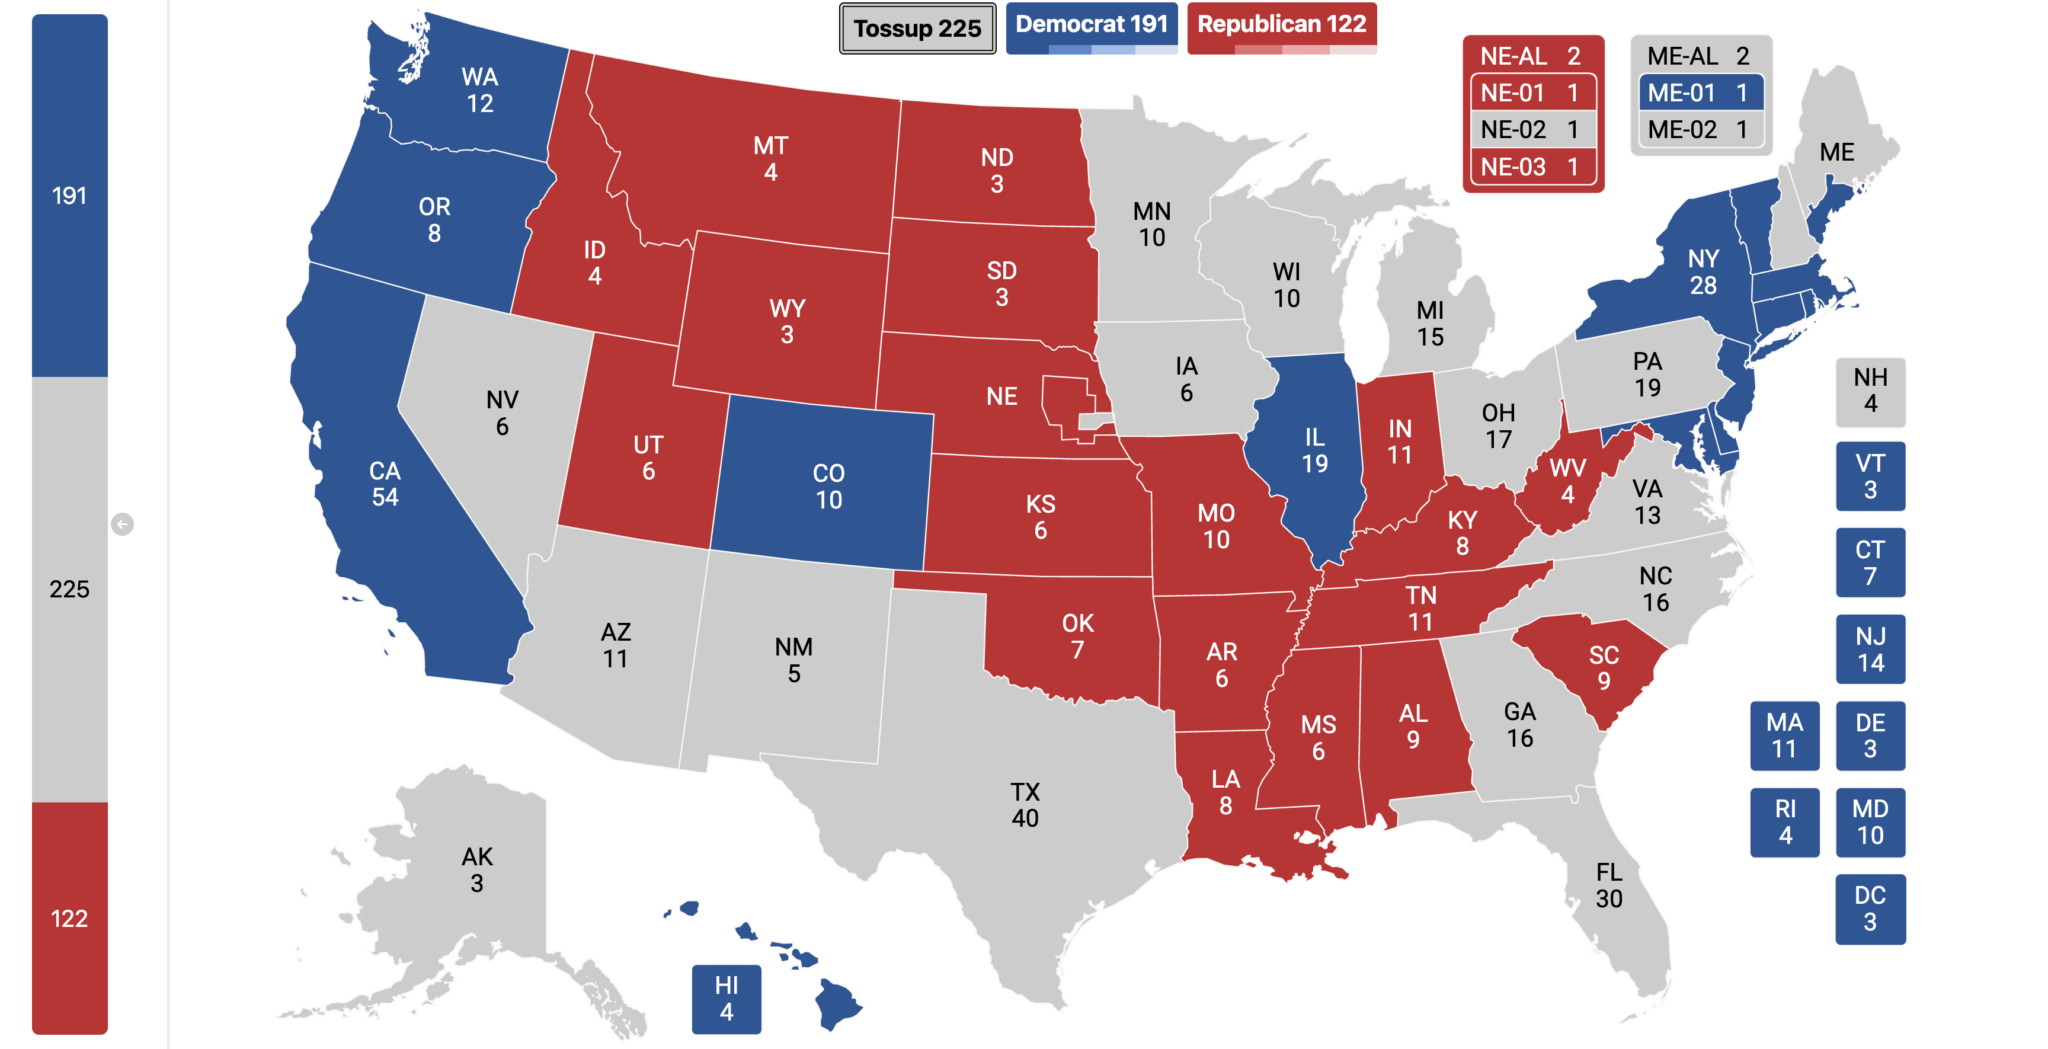 2024 Election Map Prediction Based on Poll Averages EP Official